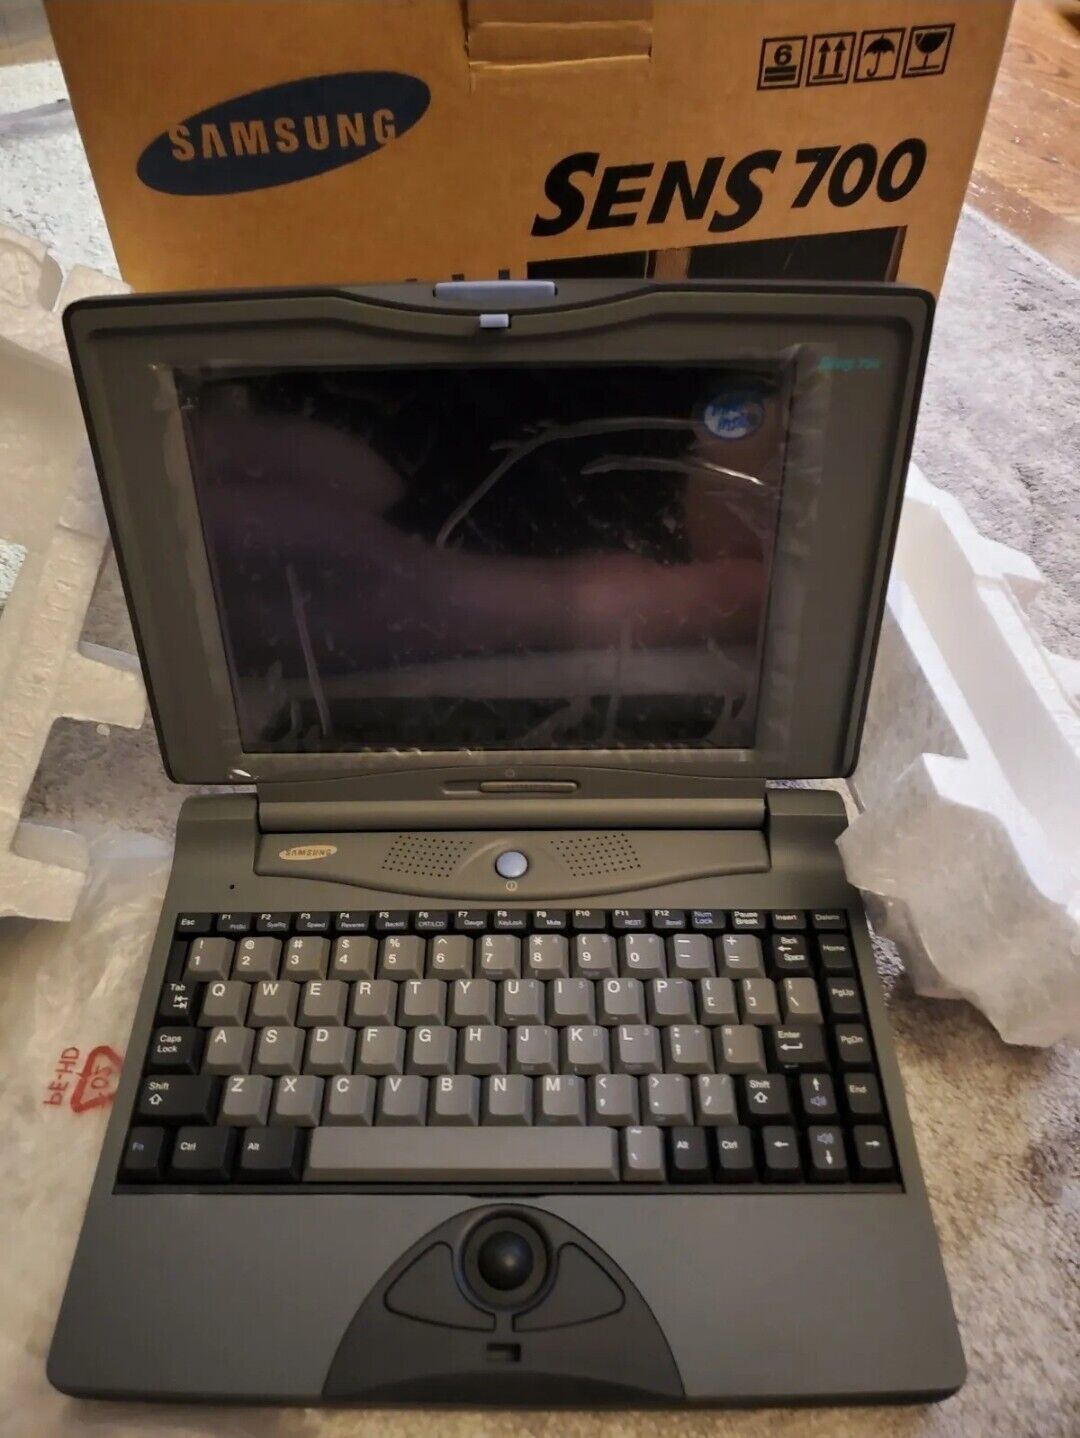 Very FIRST Samsung Notebook From 1995 - SENS 700 - Super Rare & Collector's Item